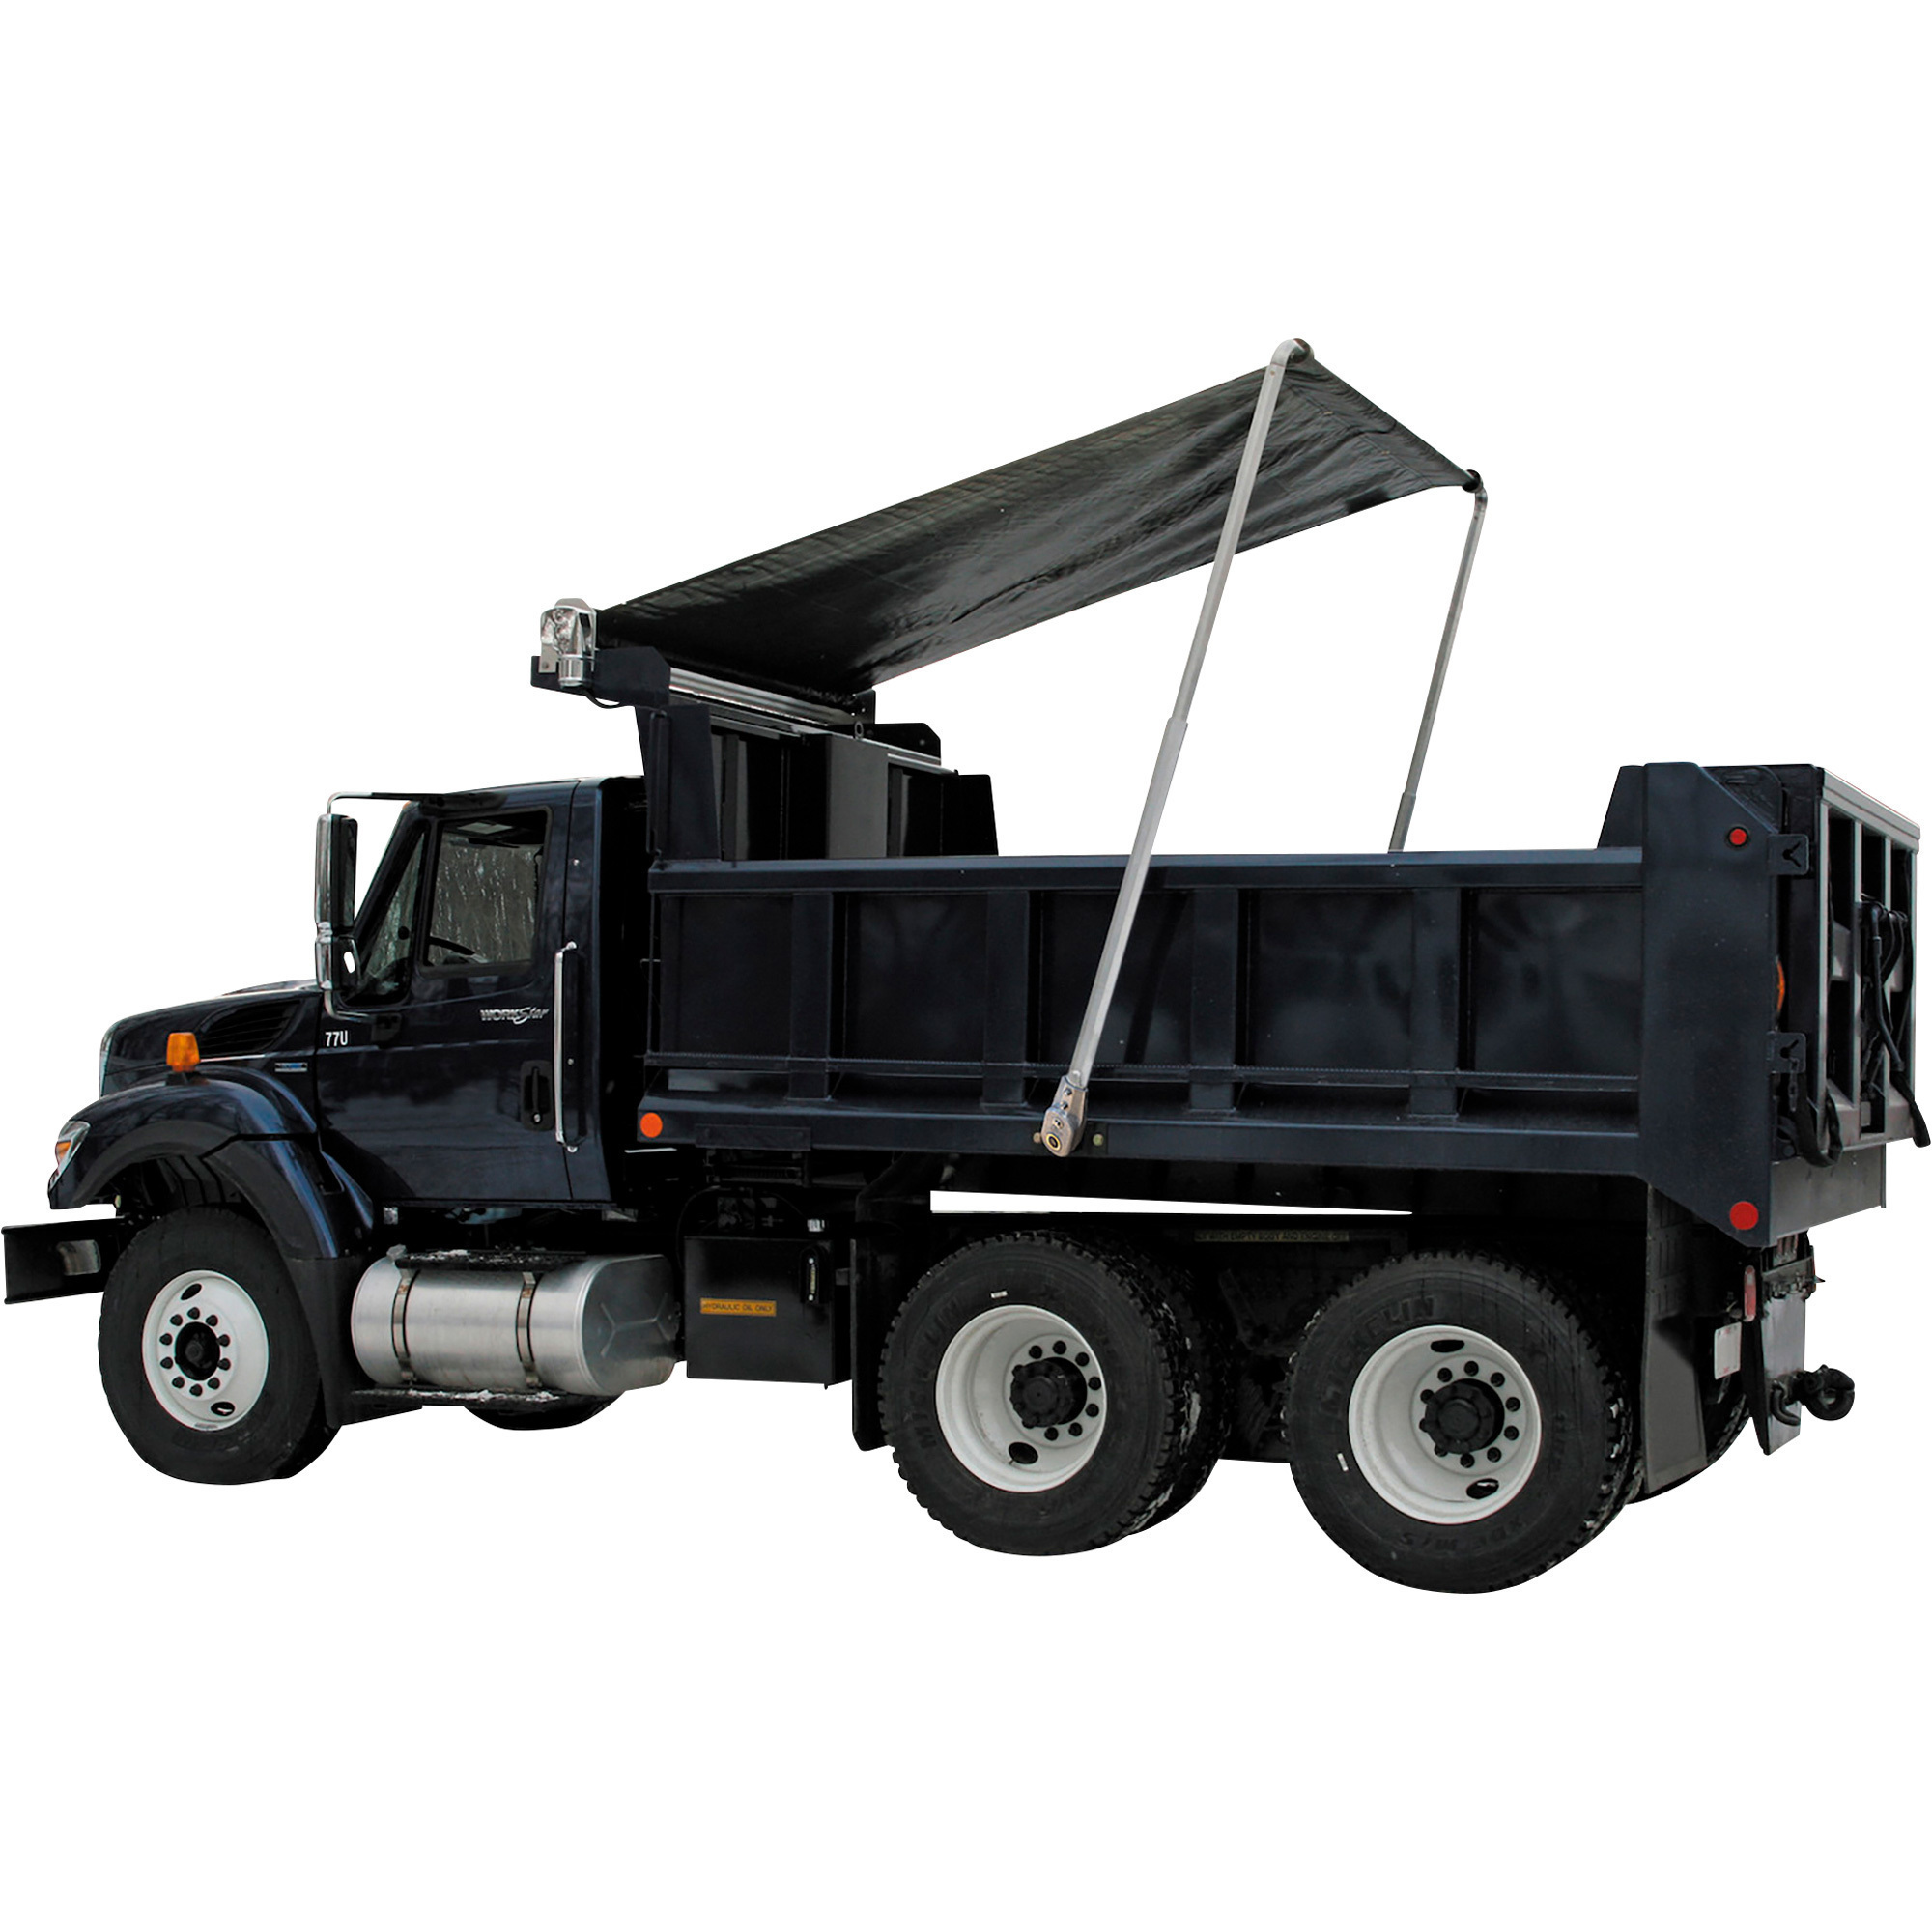 Buyers Products Electric Side-Mount Tarp System with Wind Deflector, For 8ft.-19ft. Dump Trailers, 600W/90:1 Motor, 1Yr. Warranty, Model 5544000